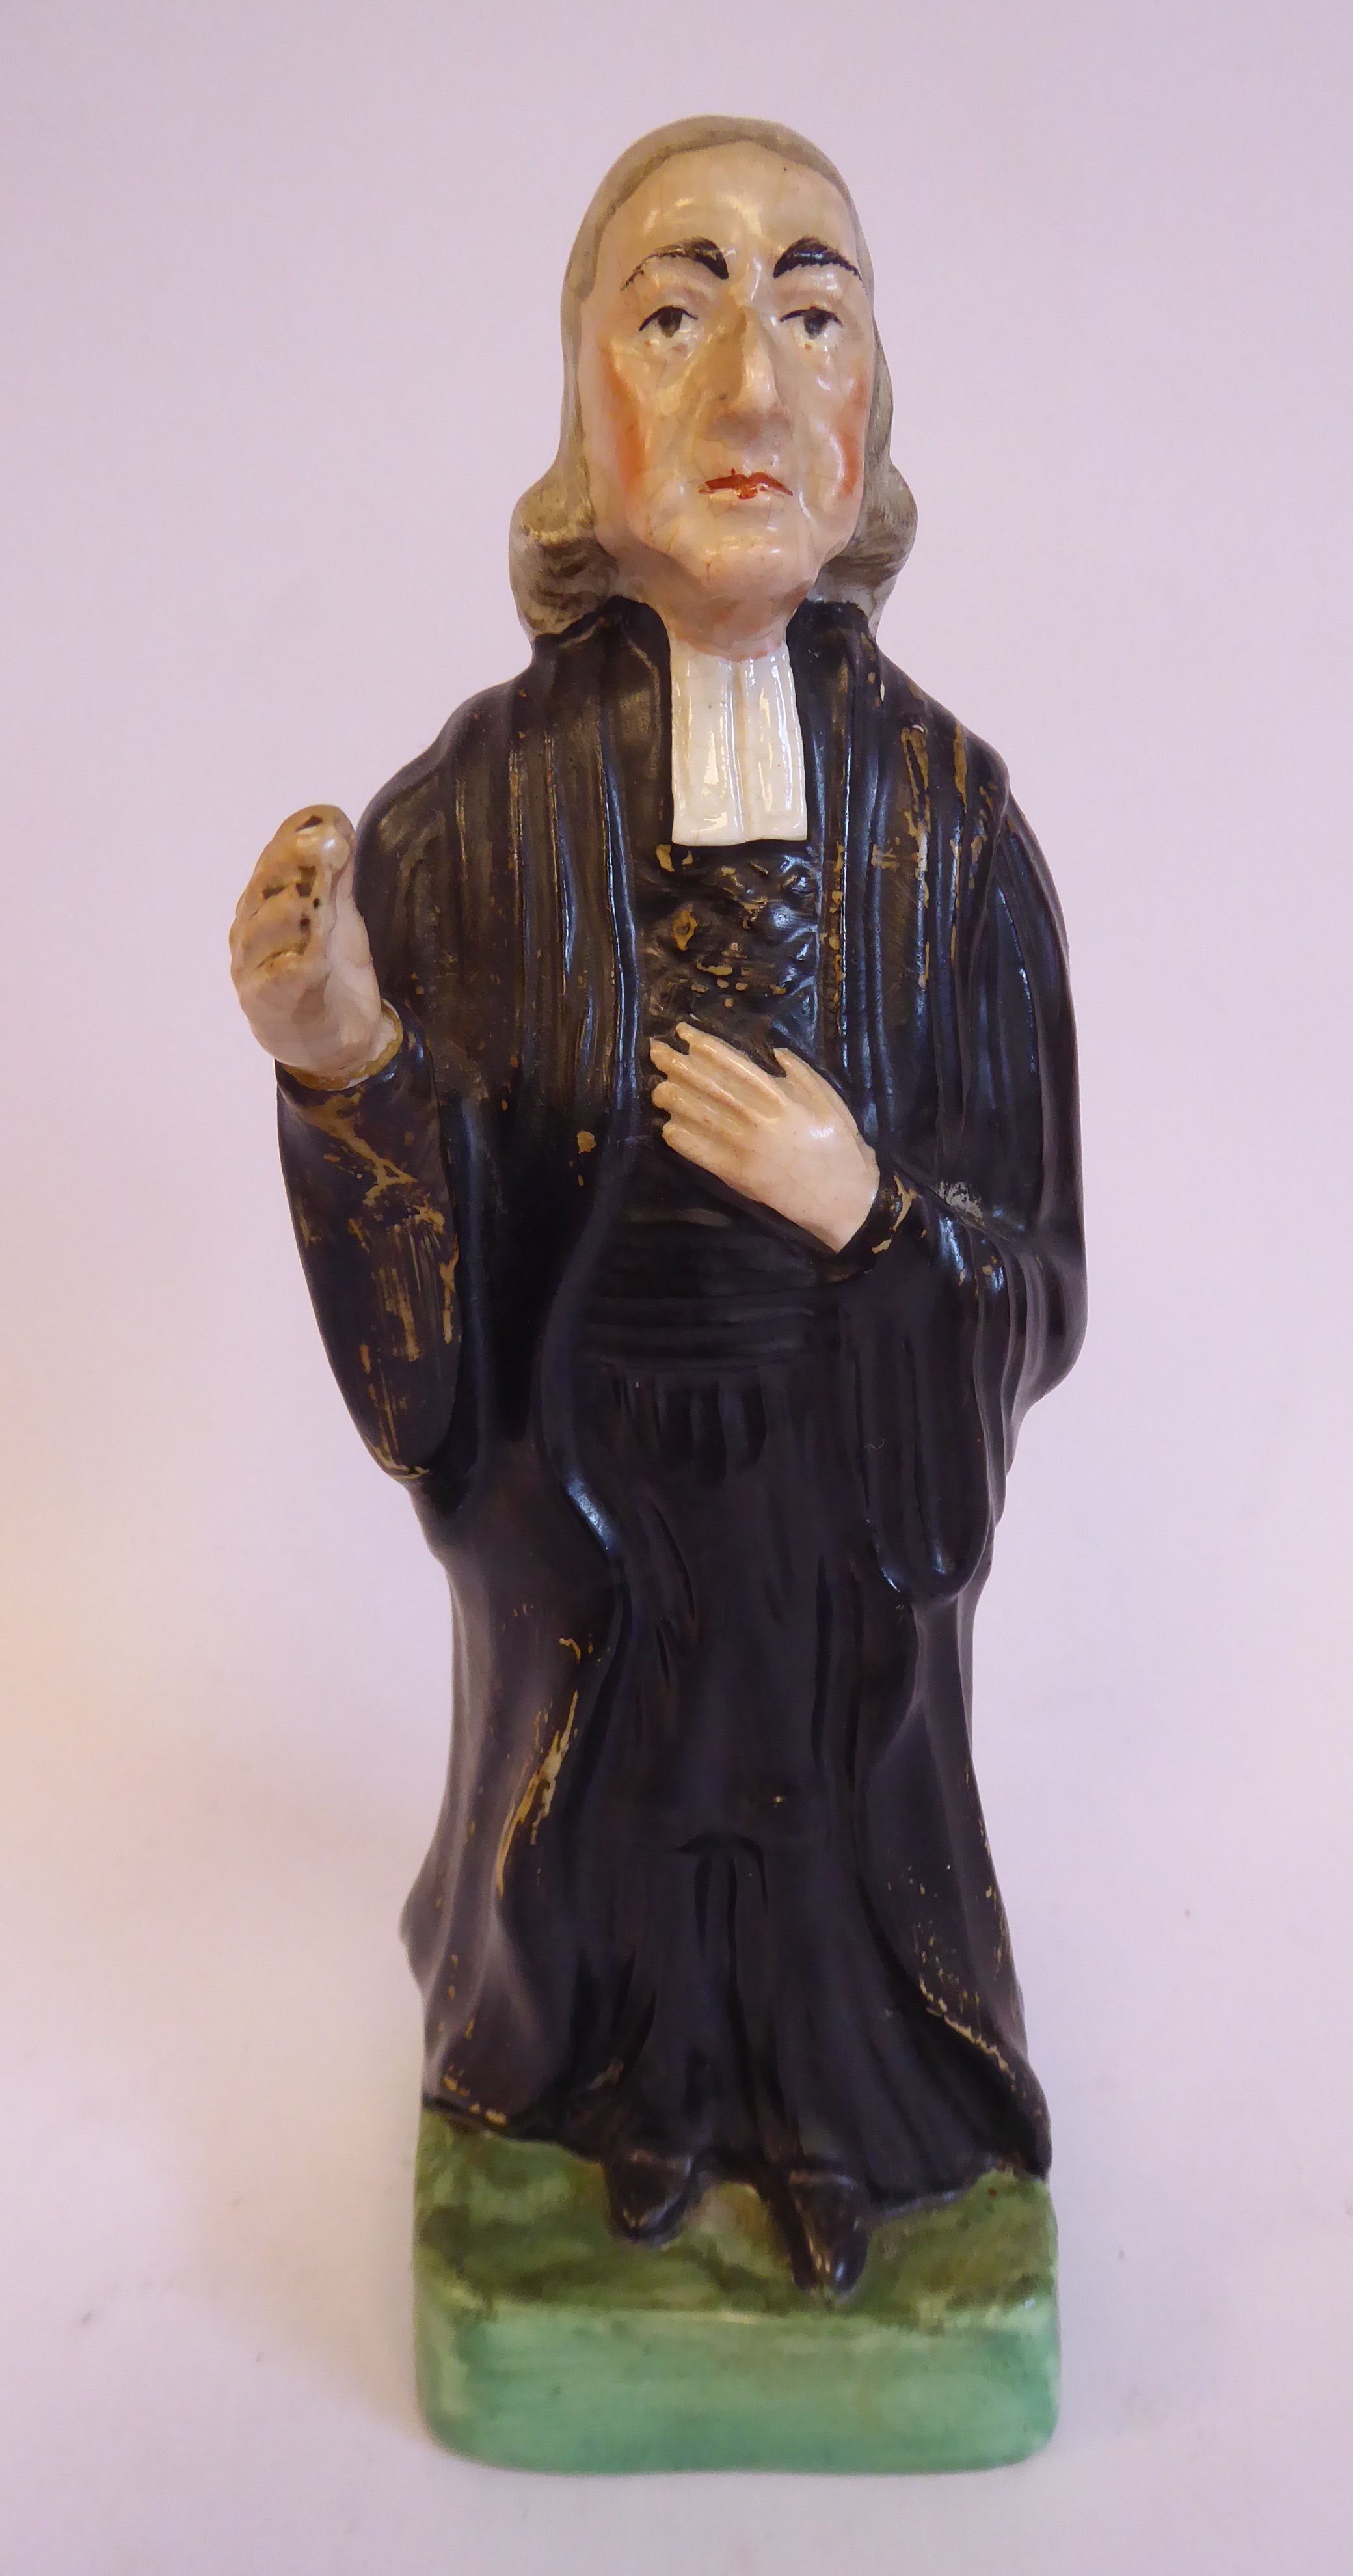 A 19thC Staffordshire pottery figure, John Wesley, wearing a black surplus and white cravat,